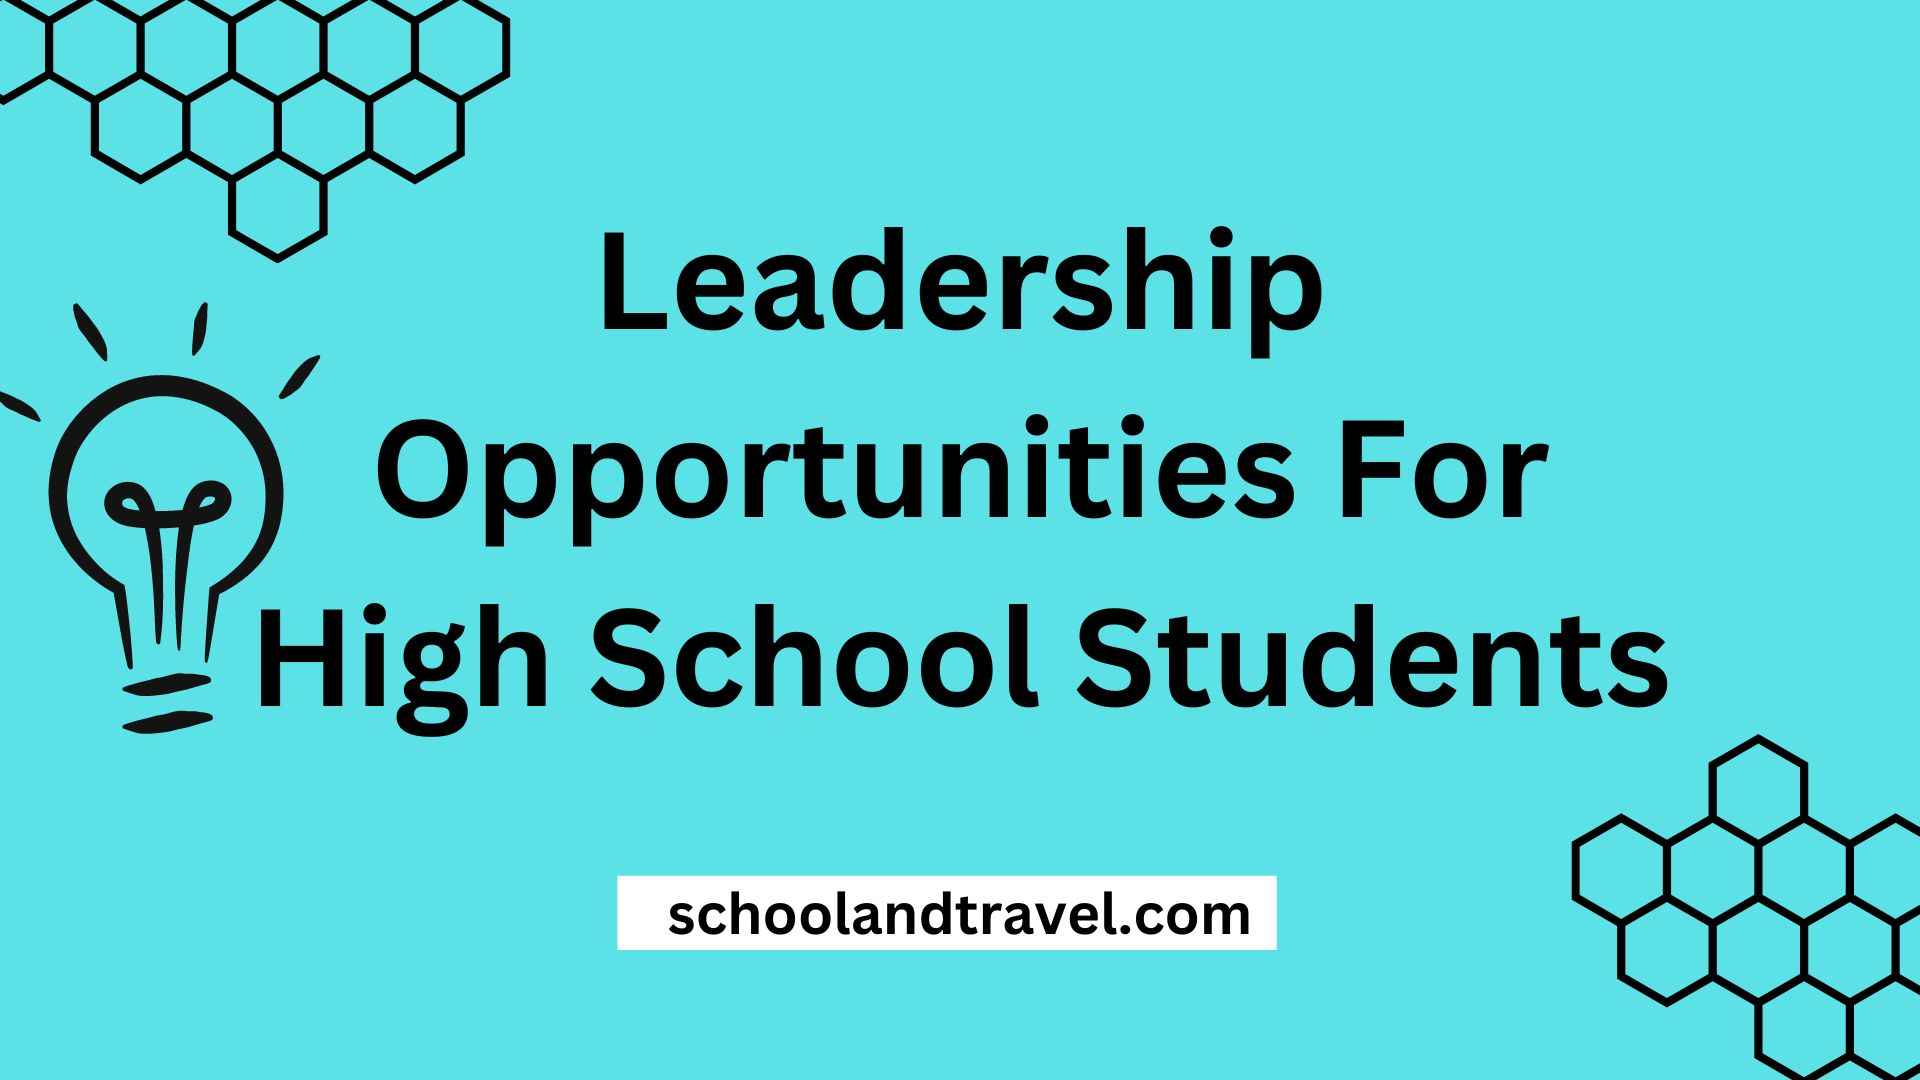 Leadership Opportunities For High School Students